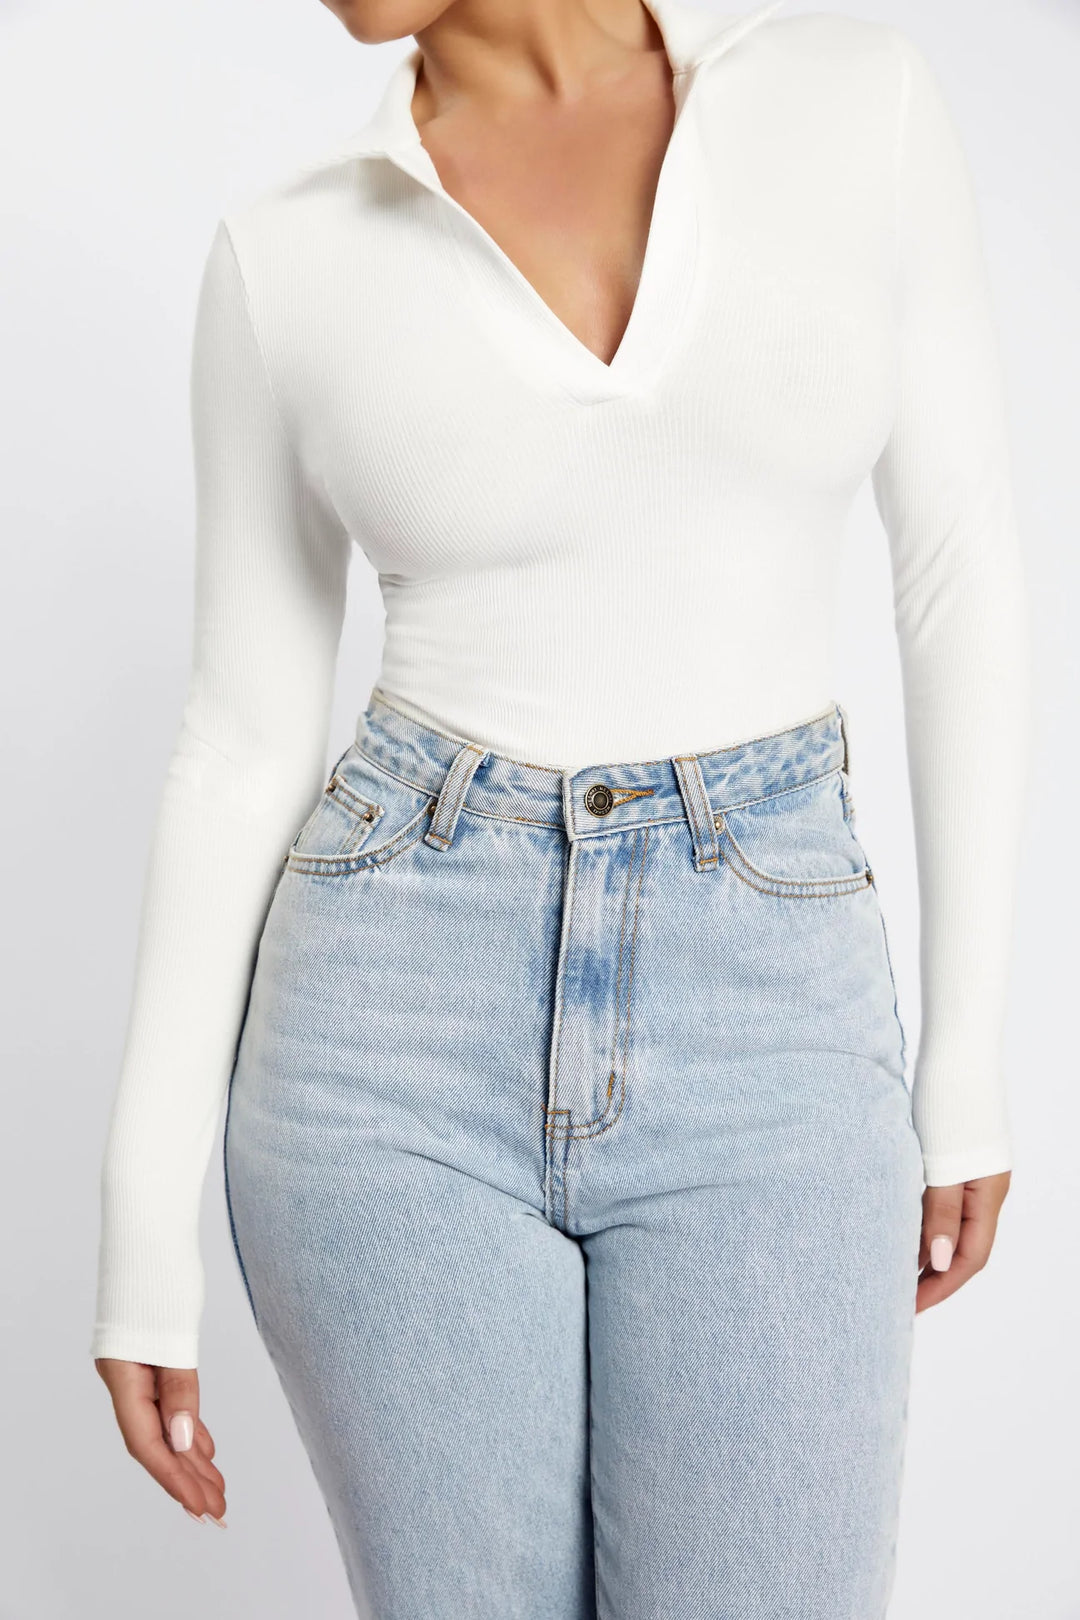 Much Obliged Long Sleeve Bodysuit - White – VICI